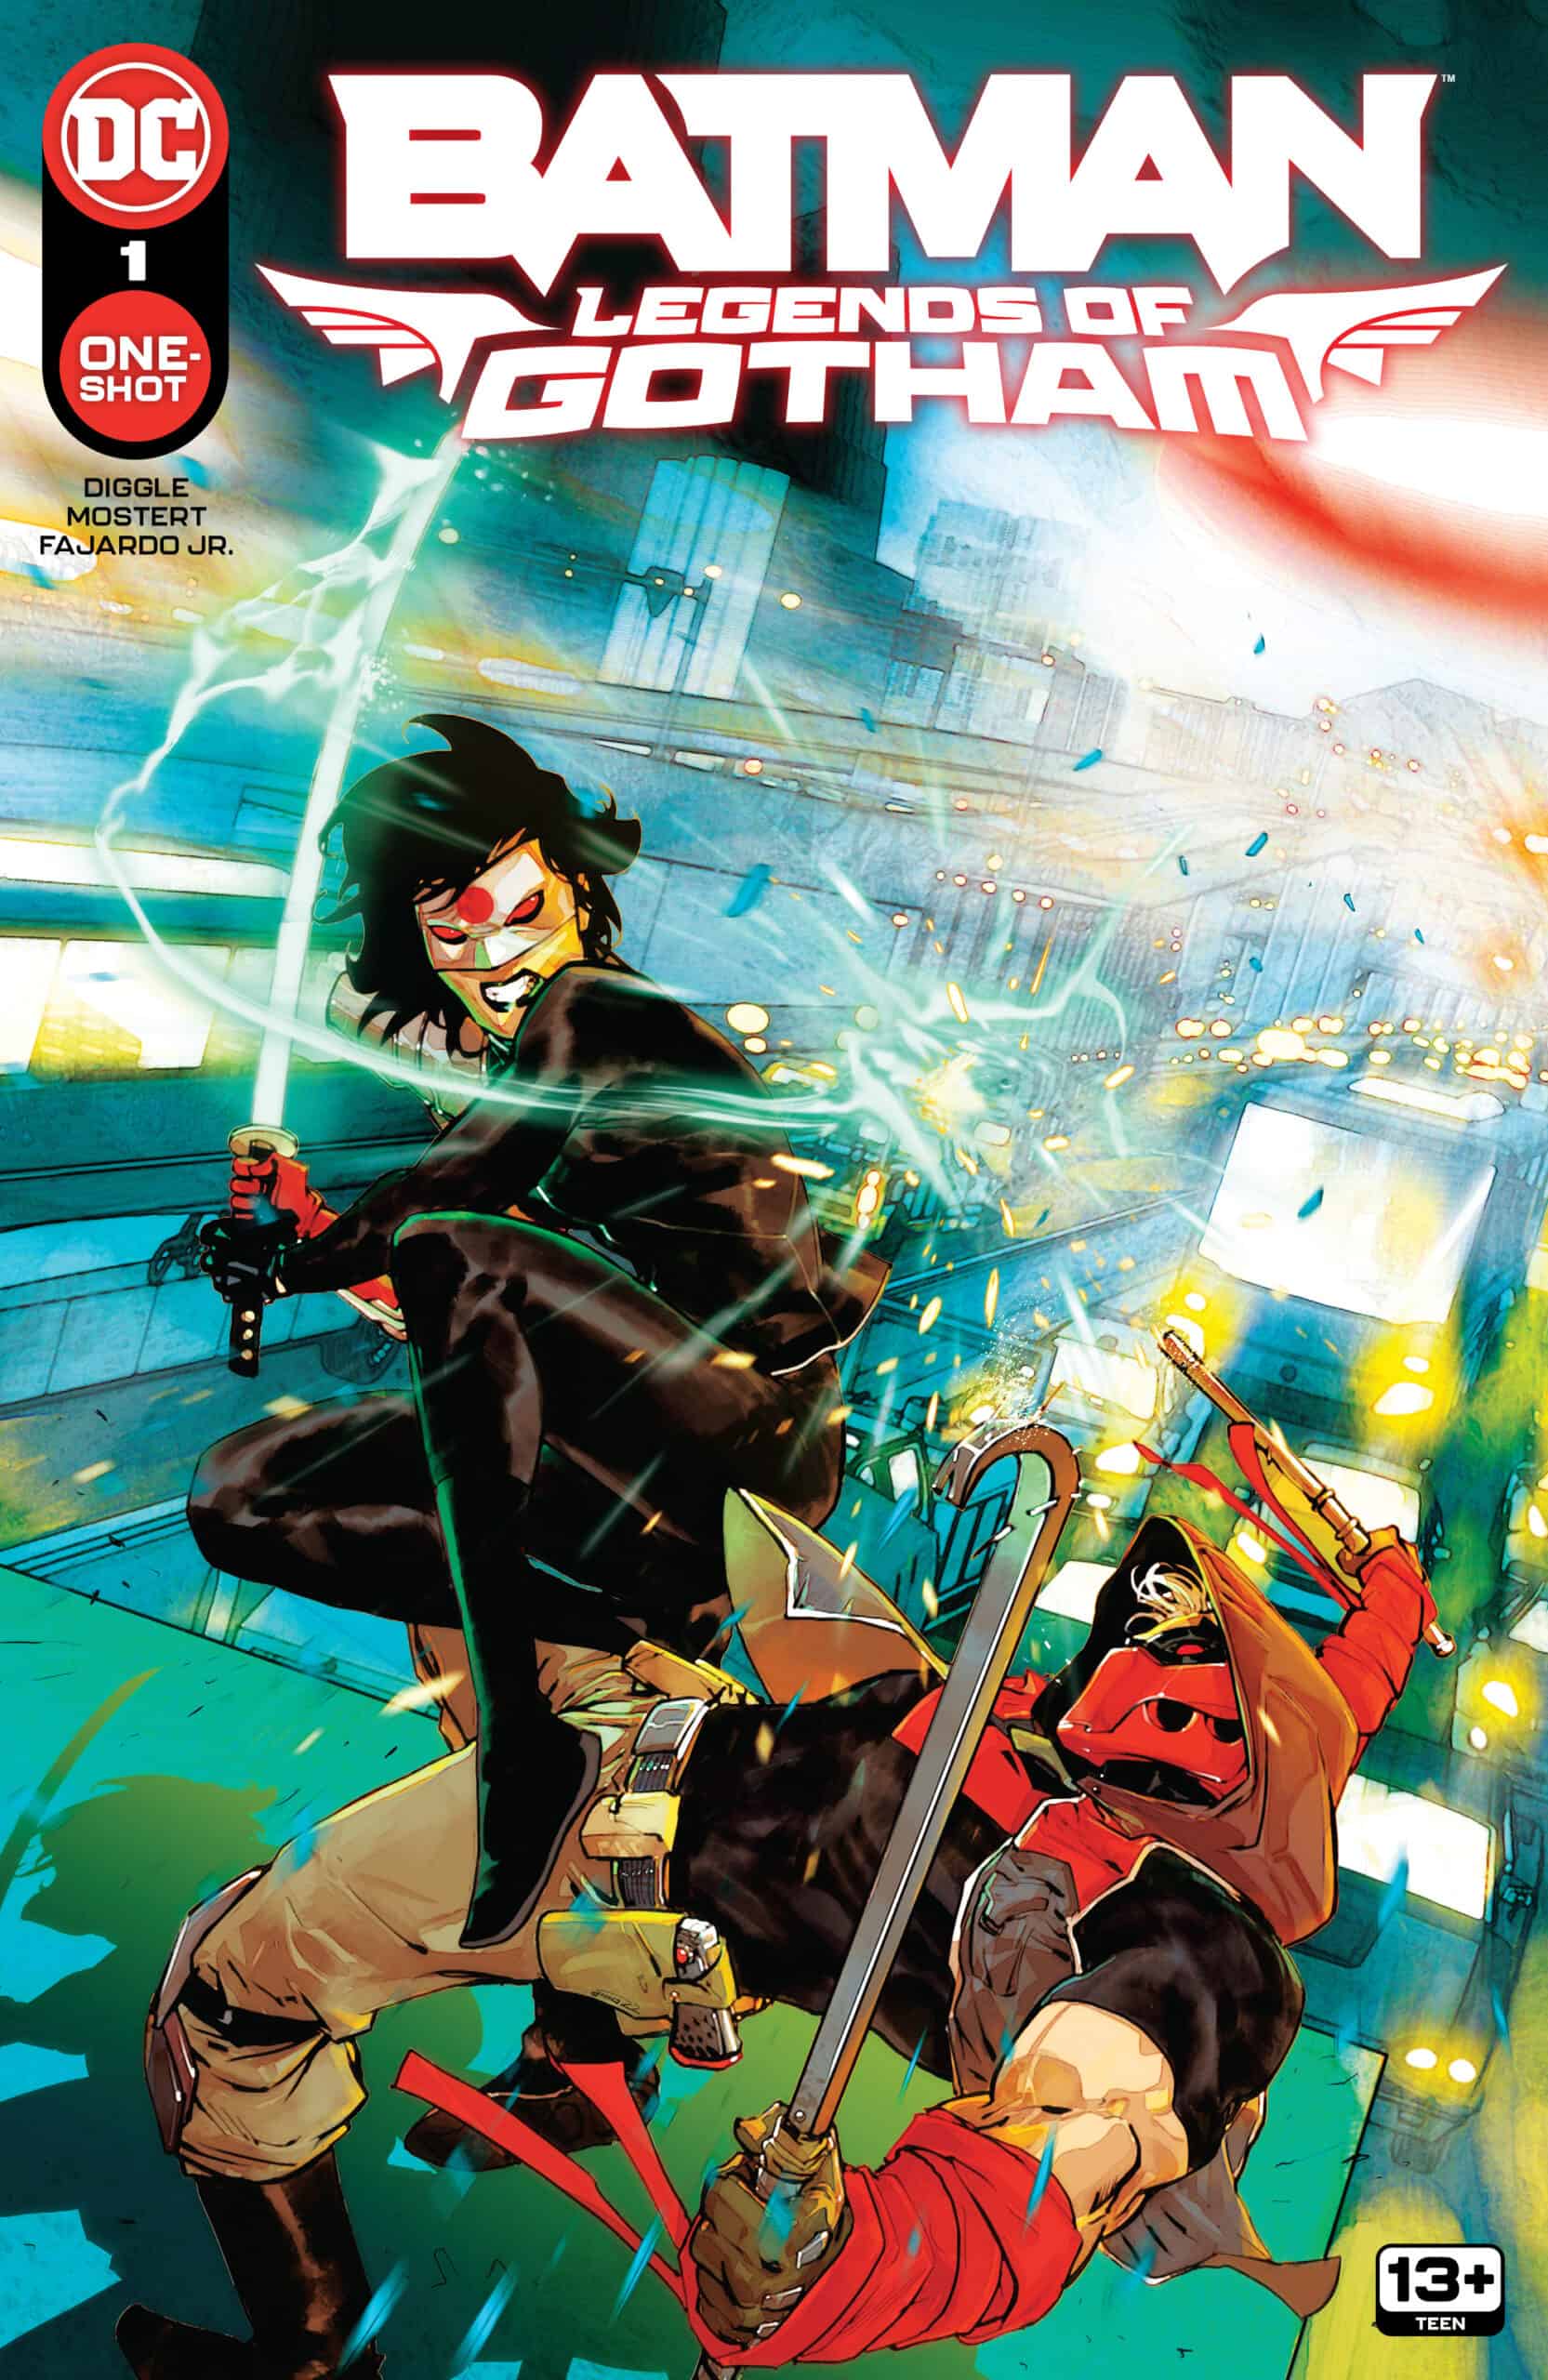 DC Sneak Preview for January 31, 2023: Red Hood Collides With The Outsides in BATMAN: LEGENDS OF GOTHAM #1 - Comic Watch